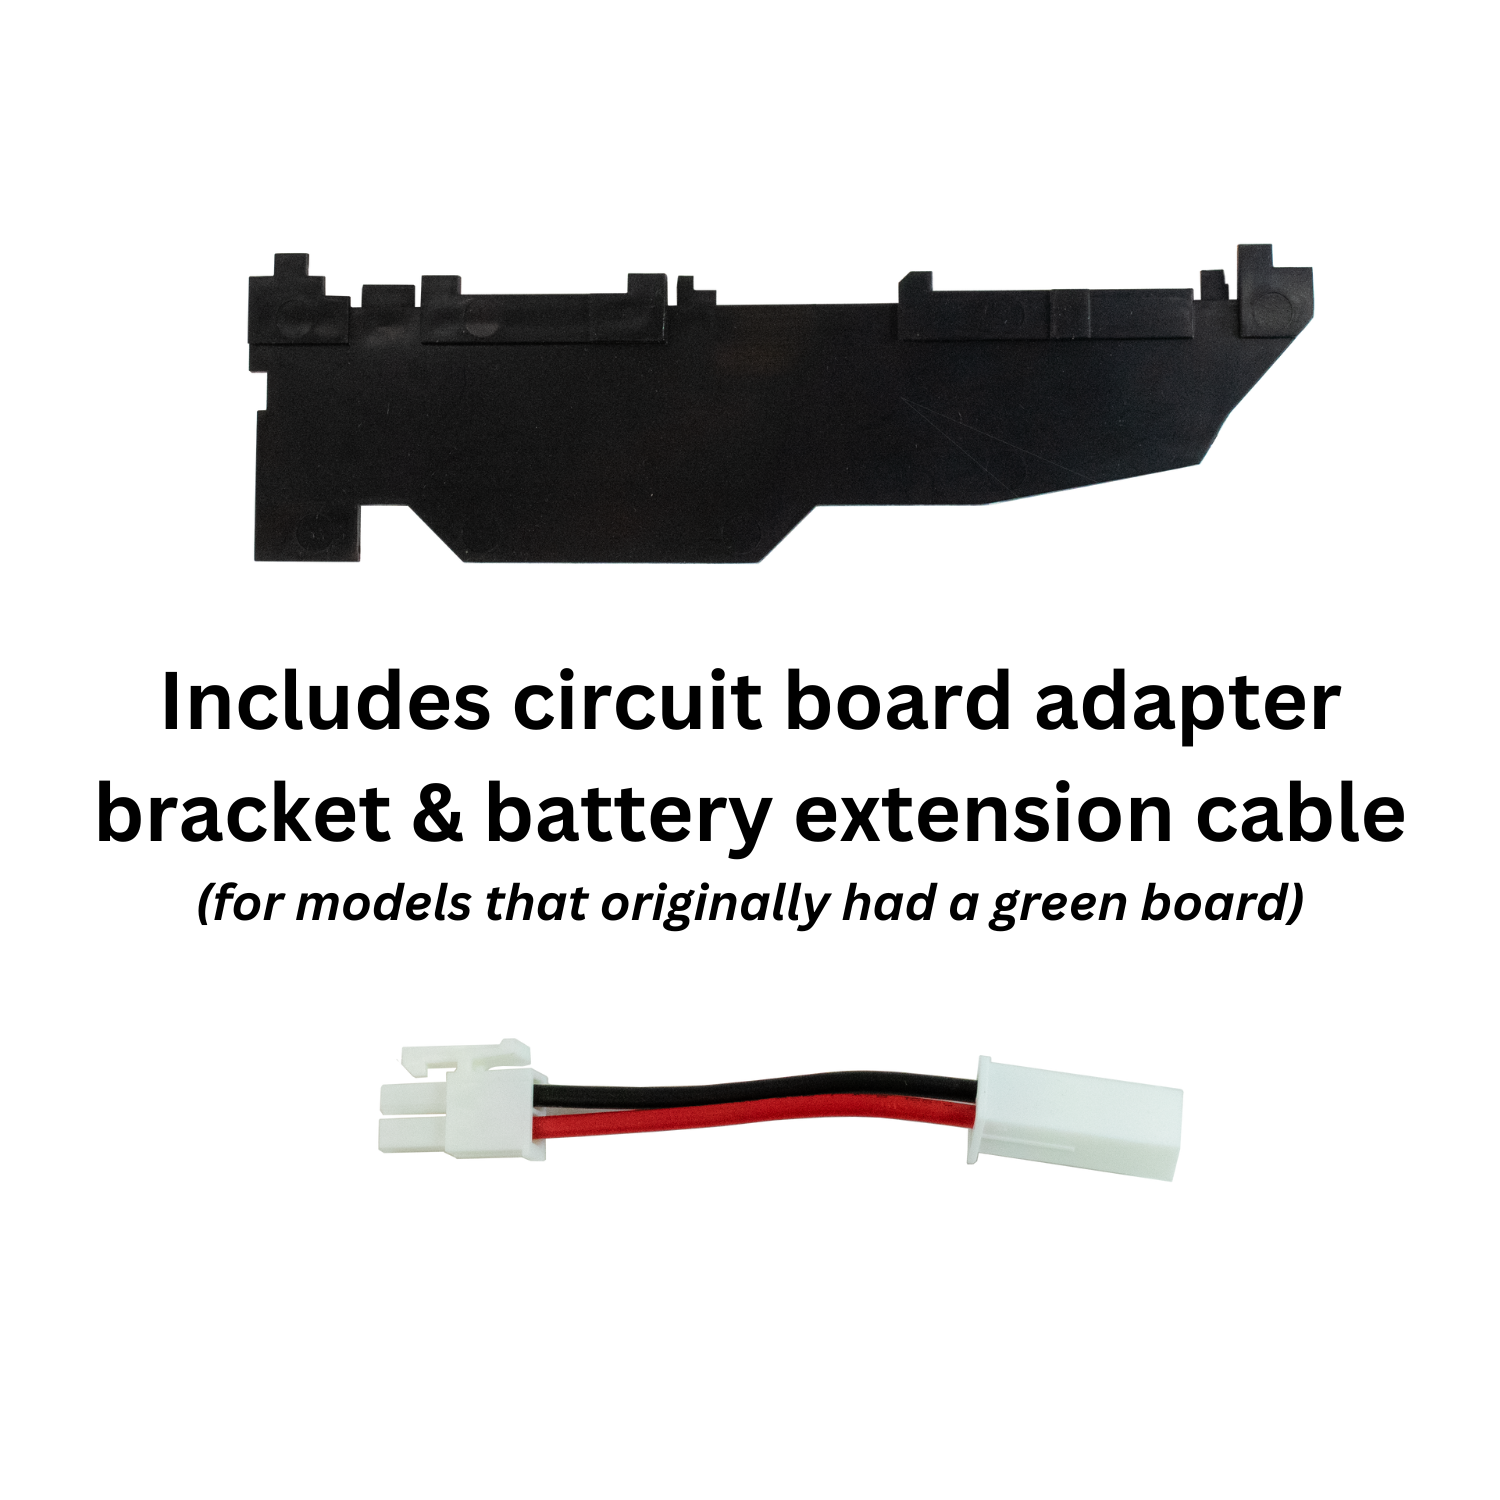 Included with the circuit board _adapter bracket and battery extension cable